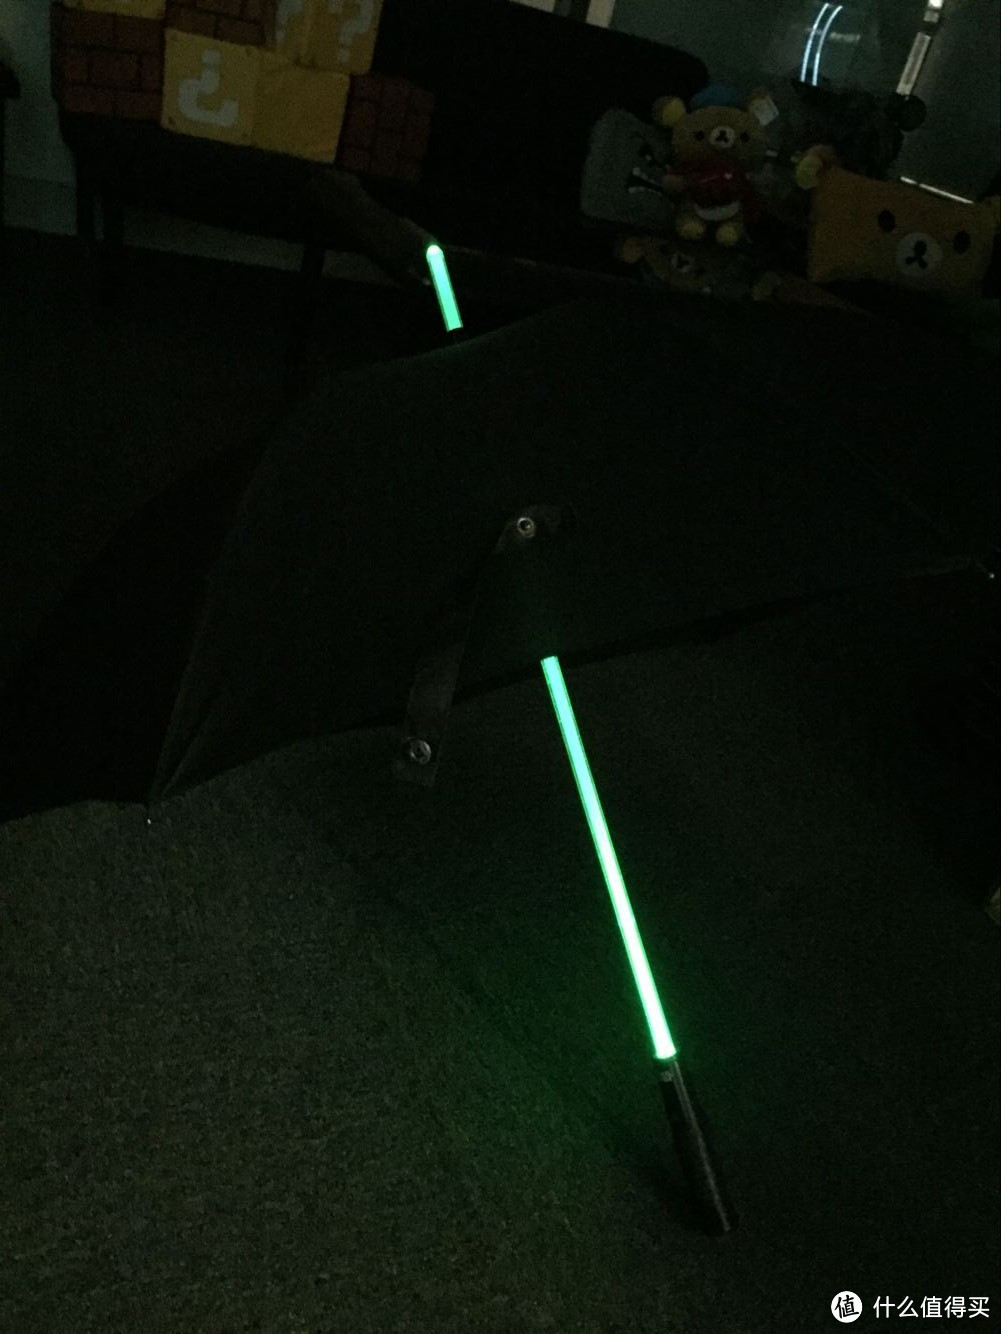 May zhe force be with your Umbrella 星战党不容错过的实用官方授权雨伞